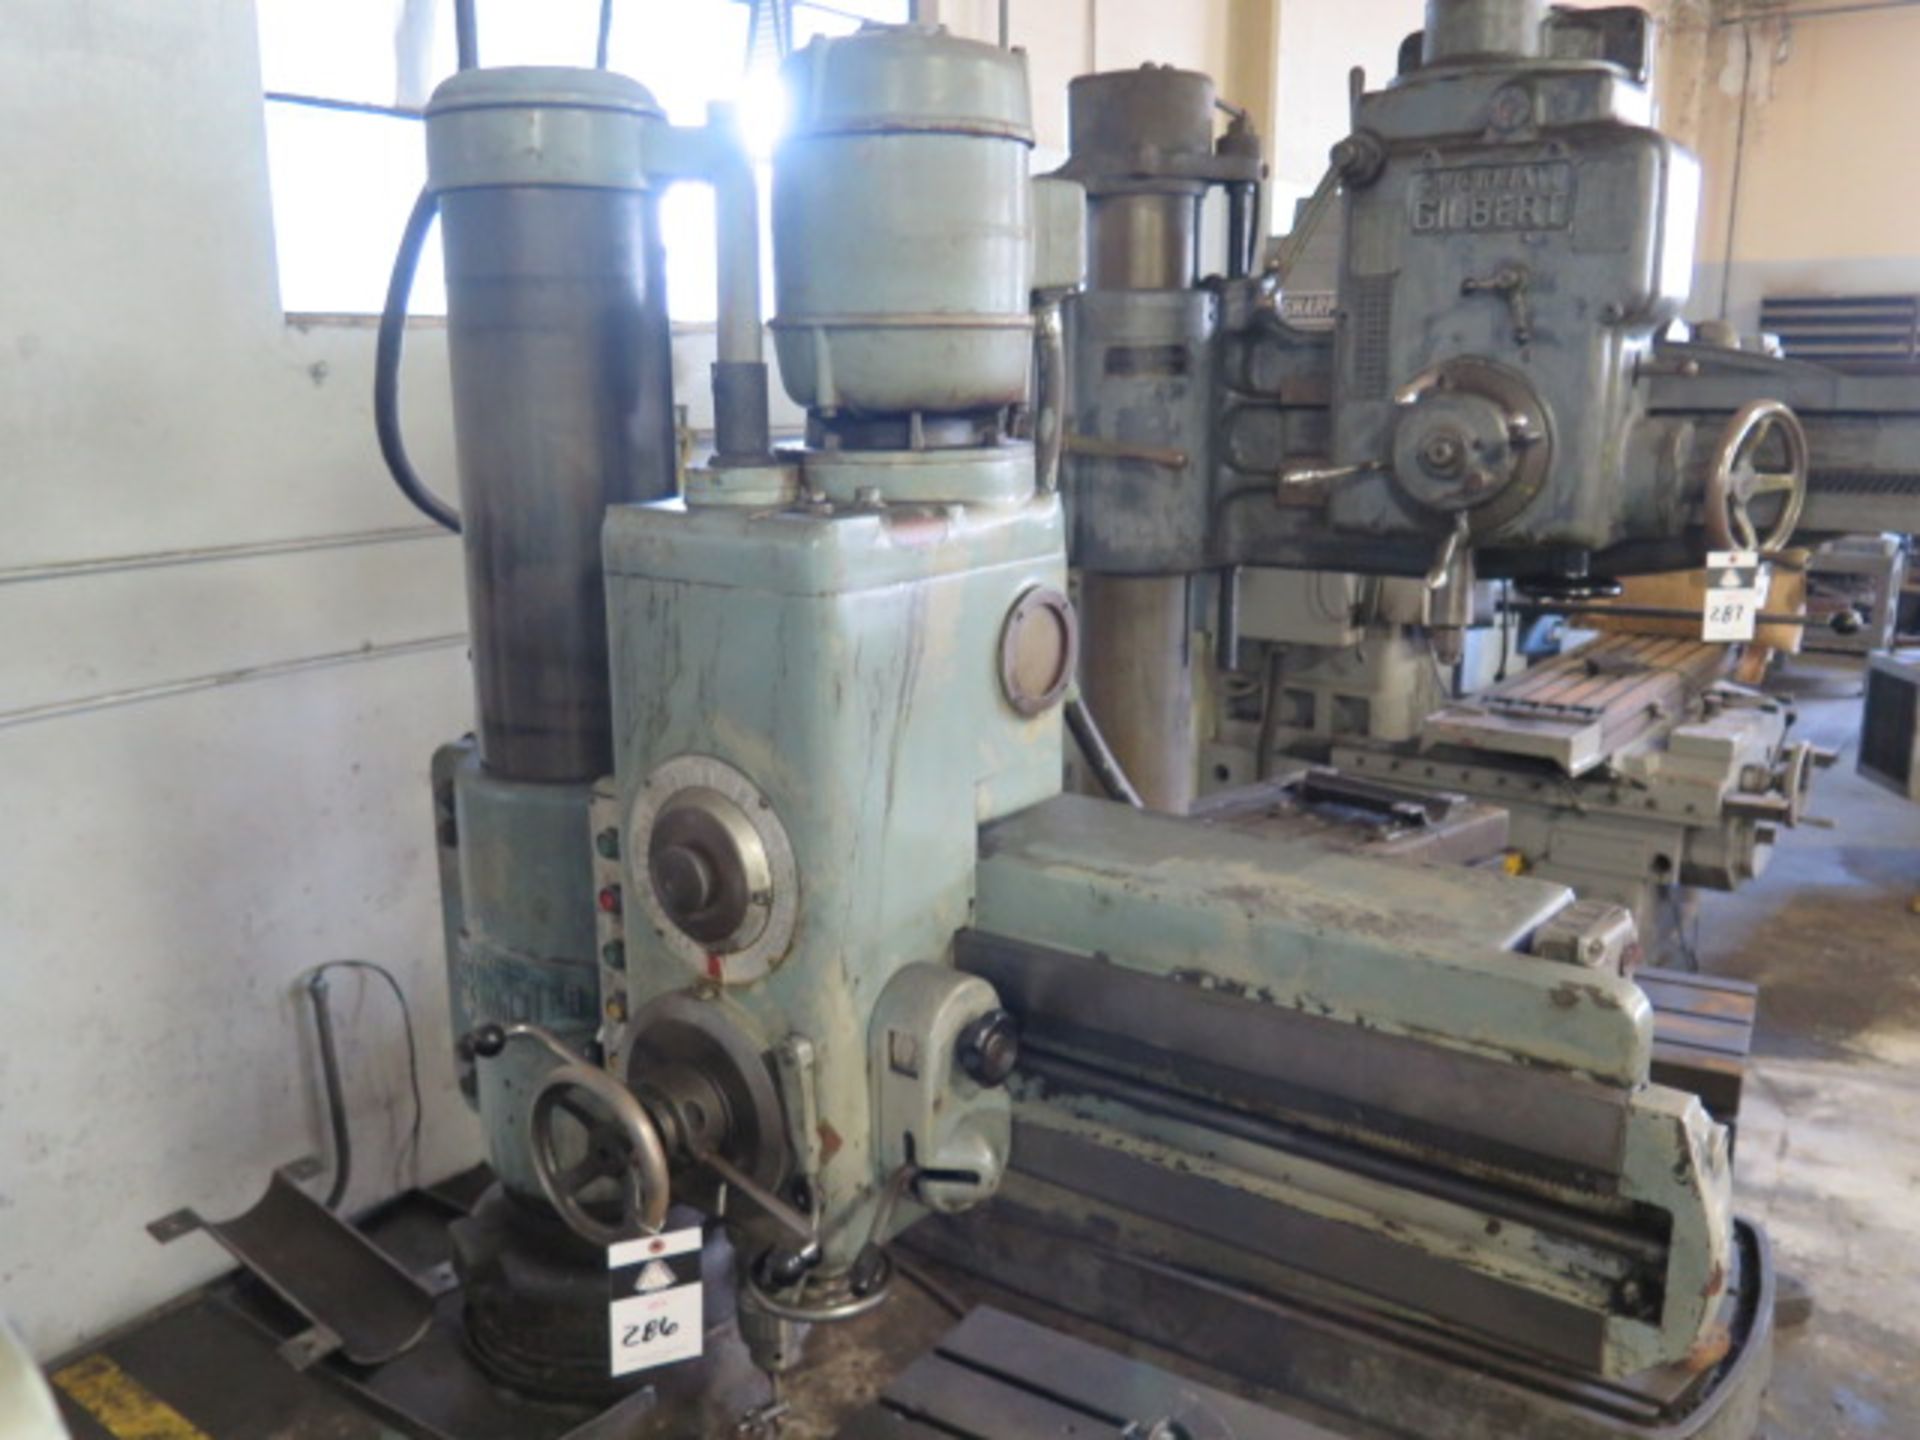 Speedmaster 9” Column x 24” Radial Arm Drill w/ 61-2100 RPM, Power Column and Feeds, SOLD AS IS - Image 2 of 8